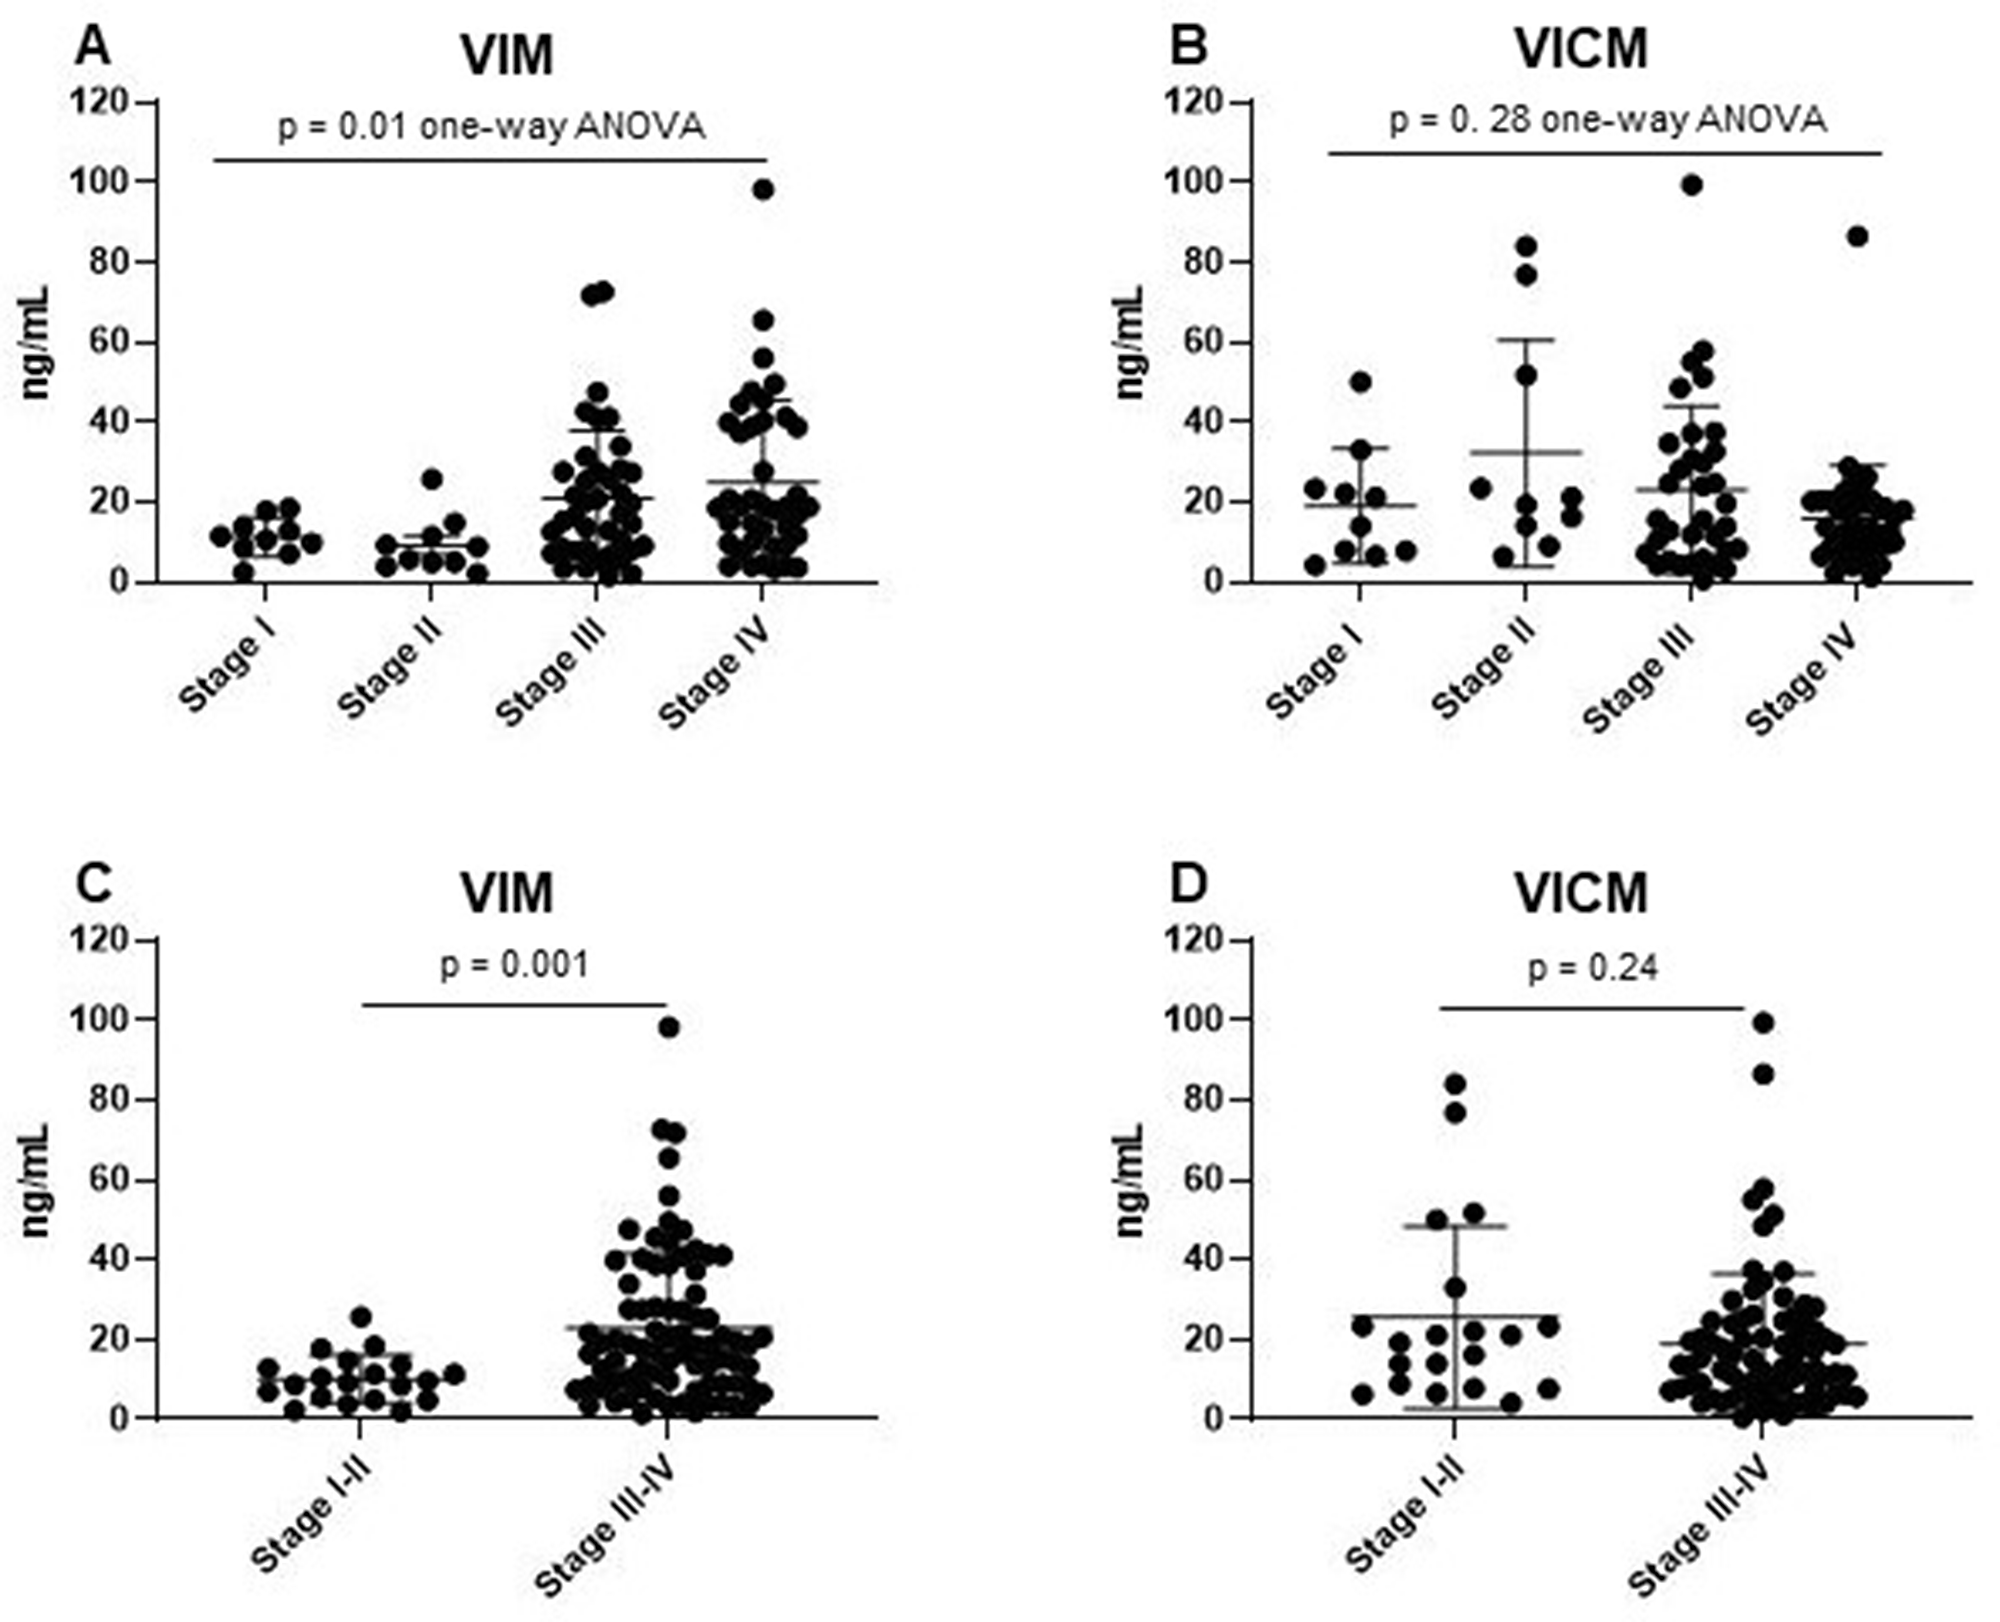 Clinical evaluation of MMP-degraded vimentin (VIM) and MMP-degraded and citrullinated vimentin (VICM) in patients with non-small cell lung cancer (NSCLC) according to TNM disease stage.